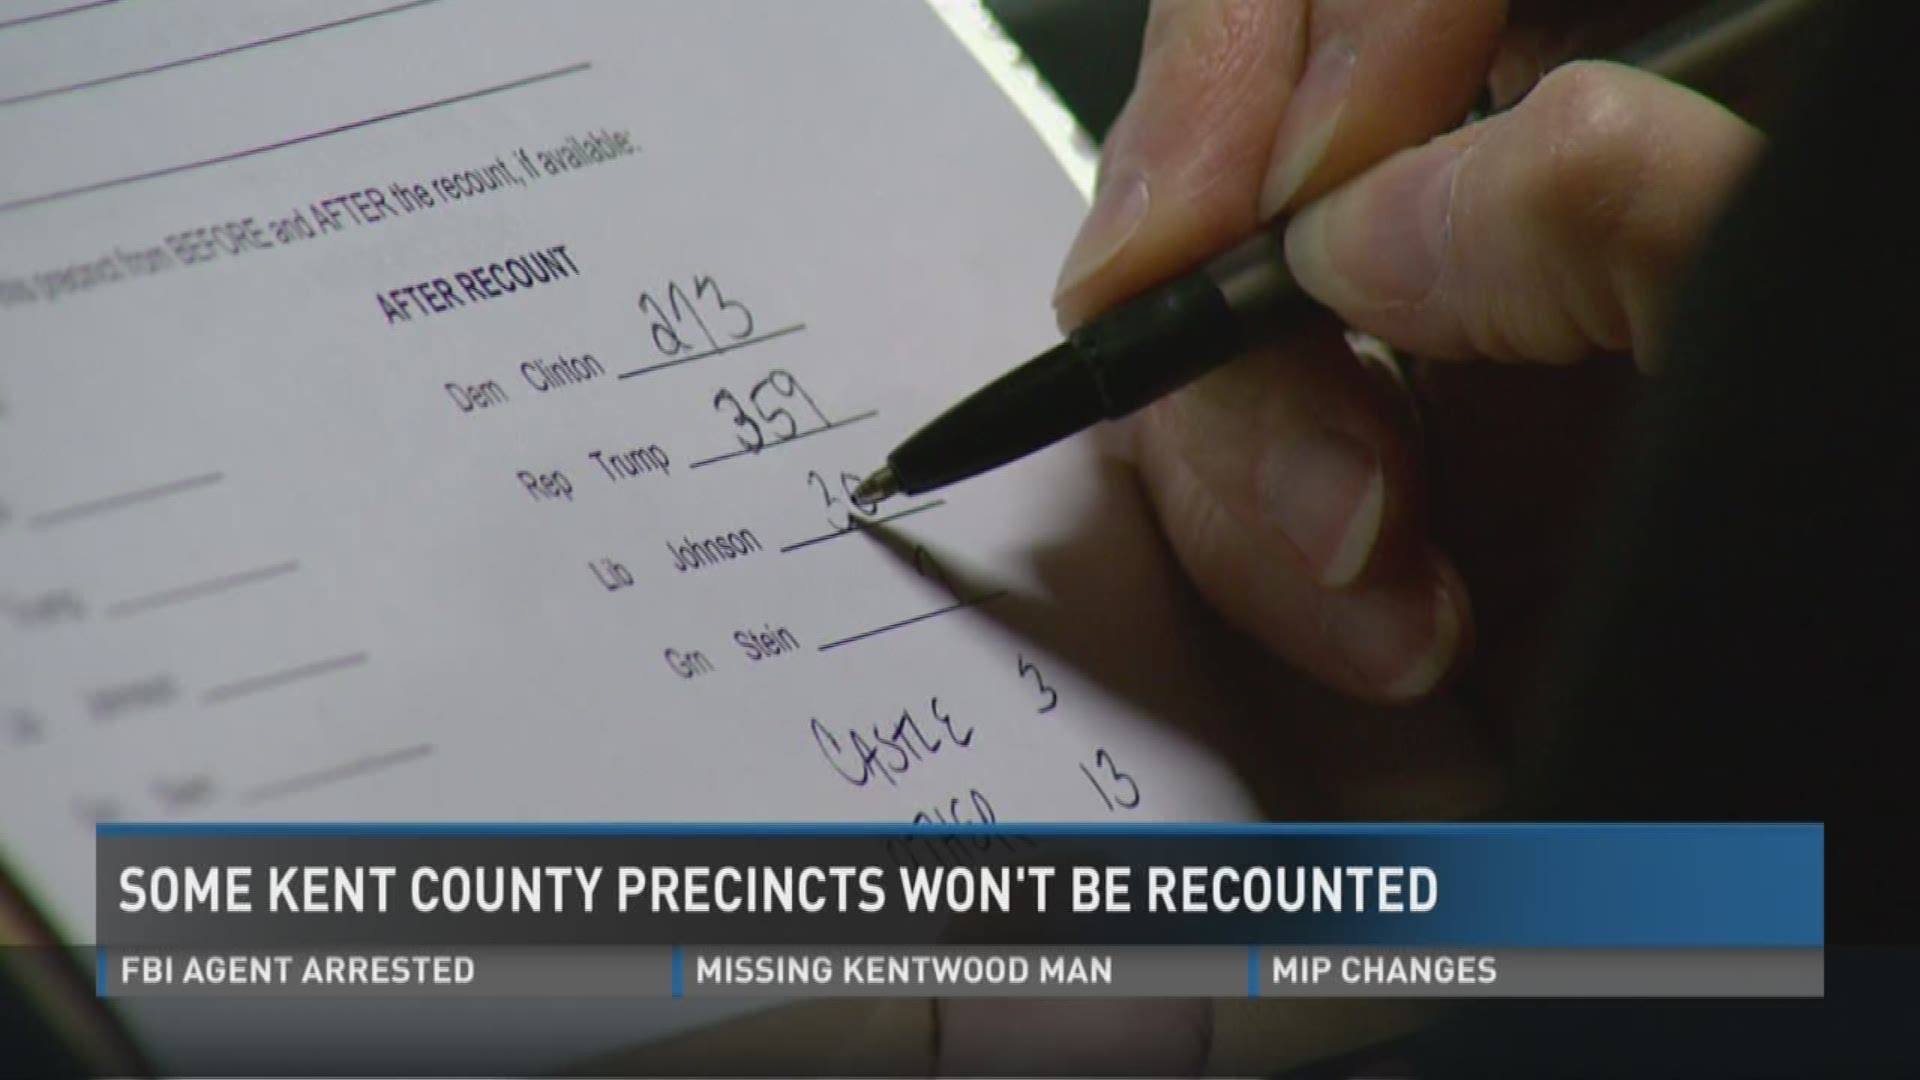 Some precincts in Kent County will not be recounted